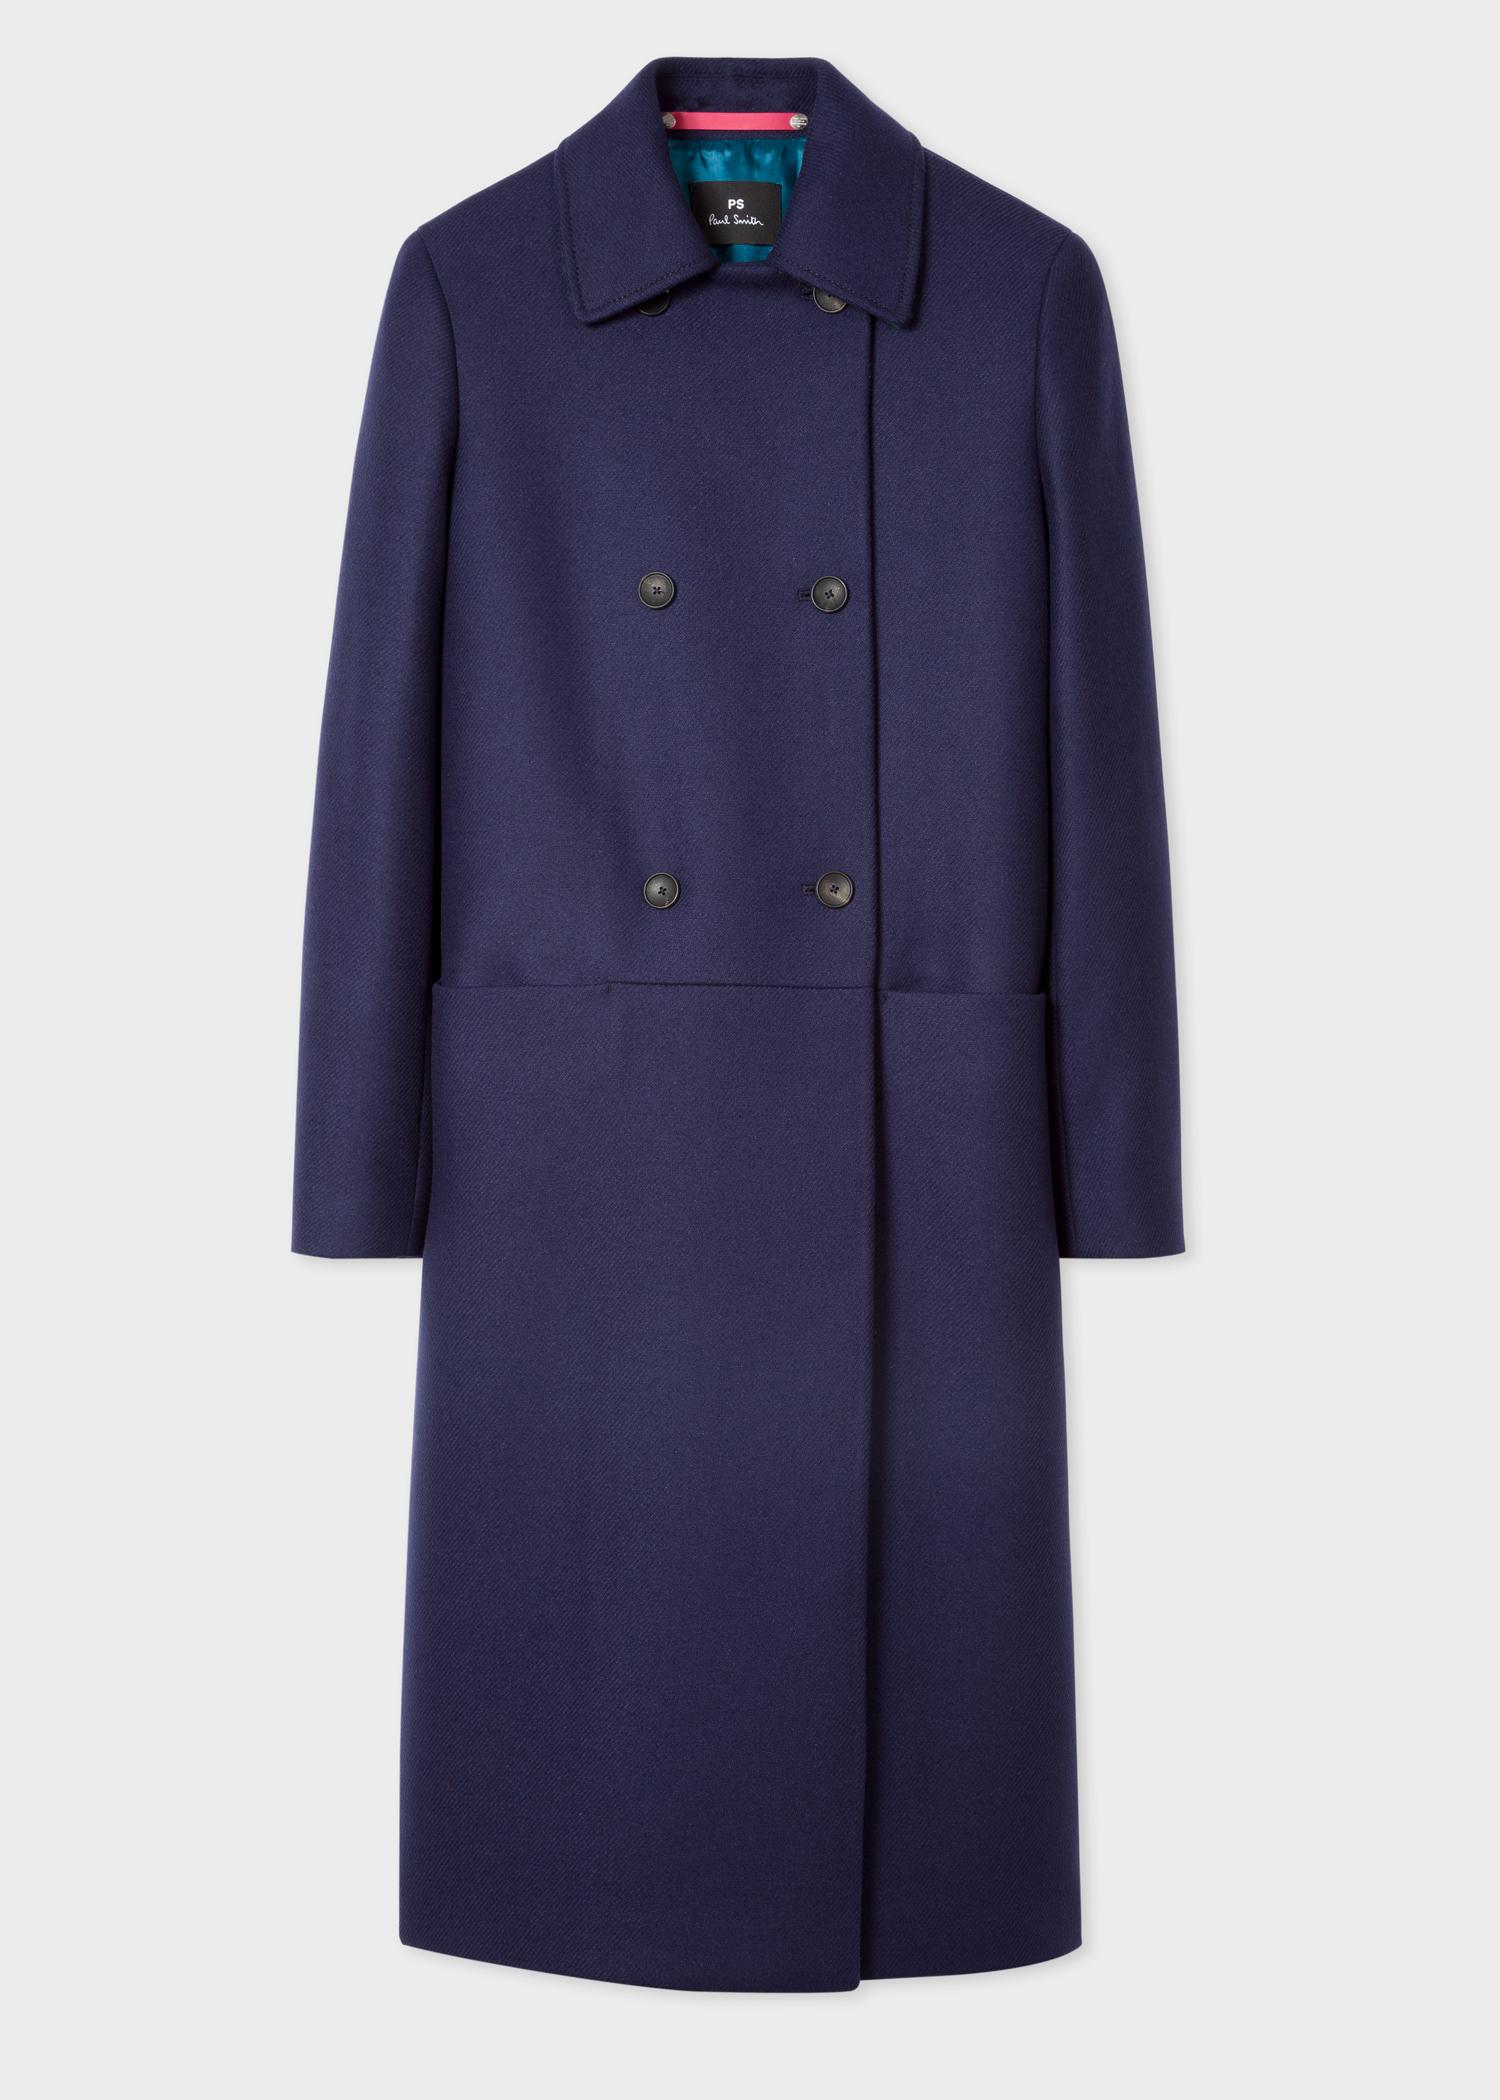 Lyst - Paul Smith Navy Double-Breasted Wool-Cashmere Overcoat in Blue